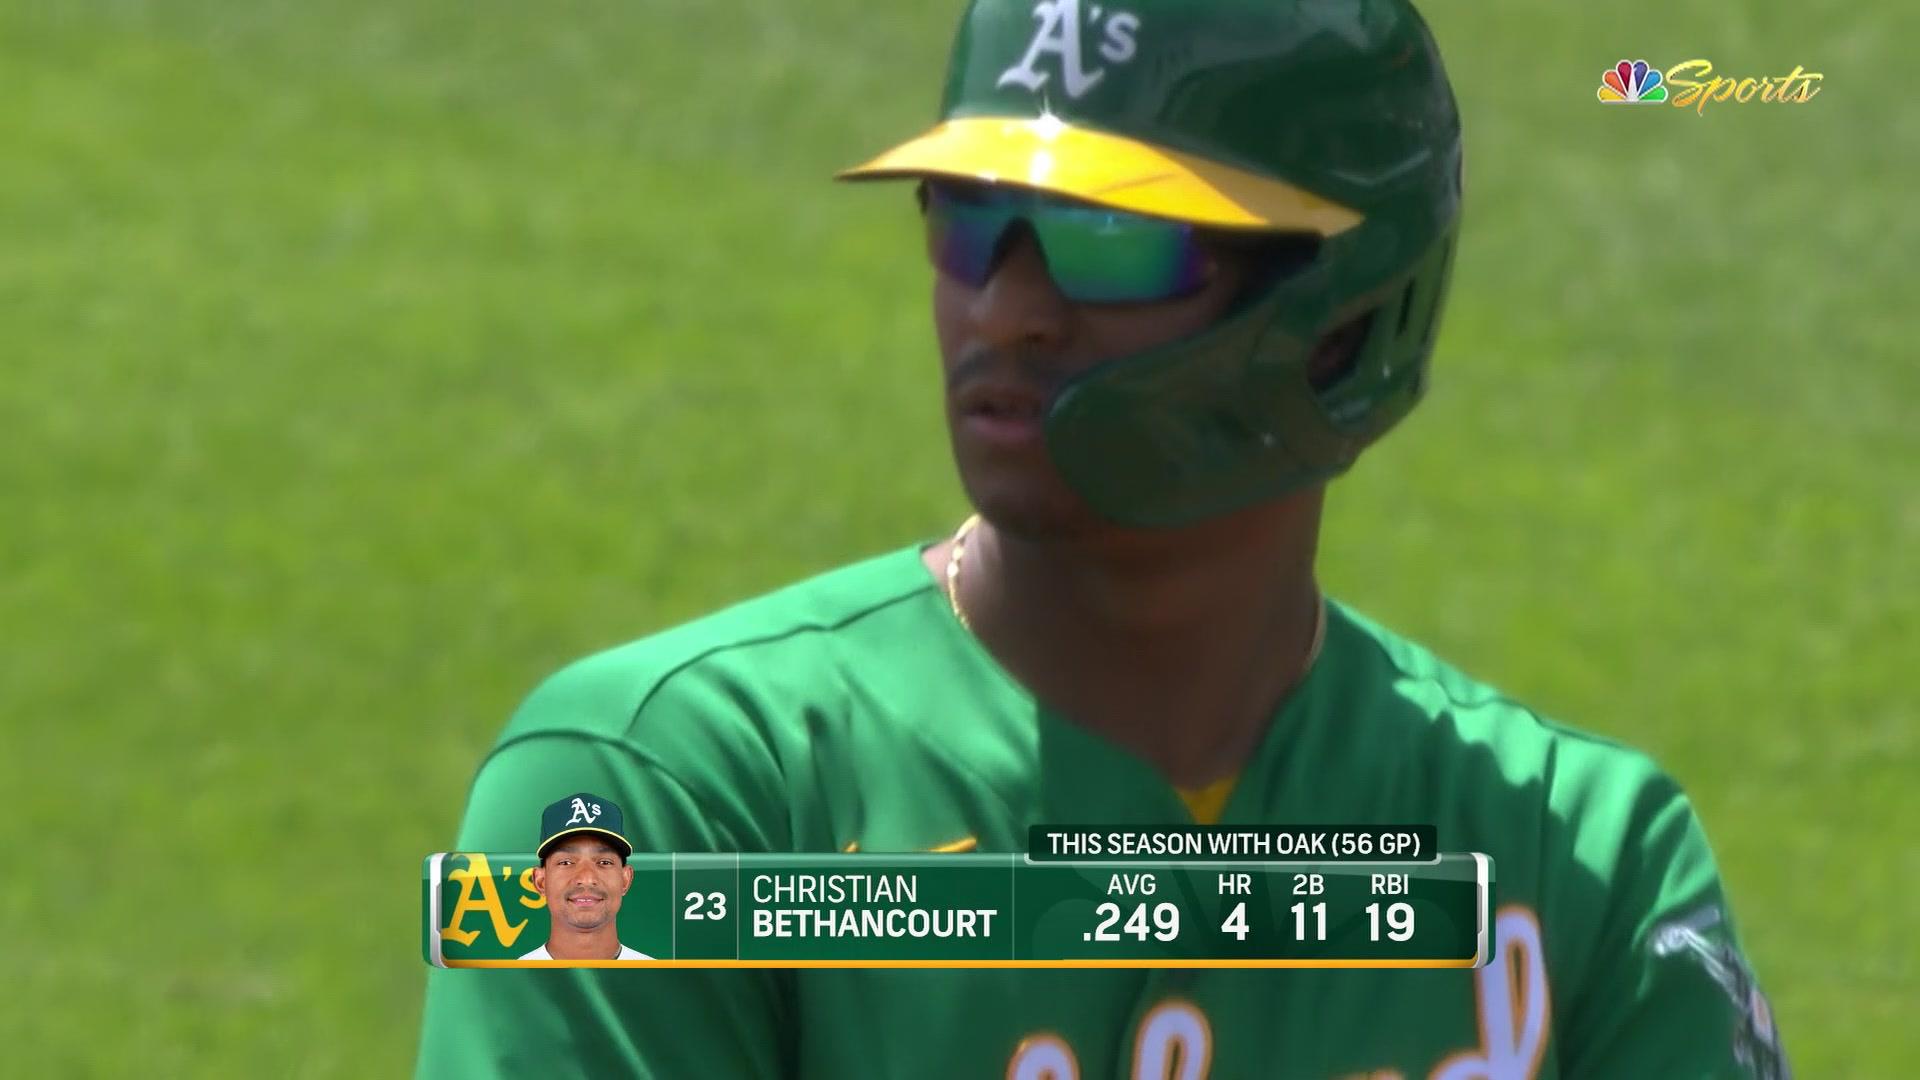 Athletics trade Christian Bethancourt to Rays for minor league